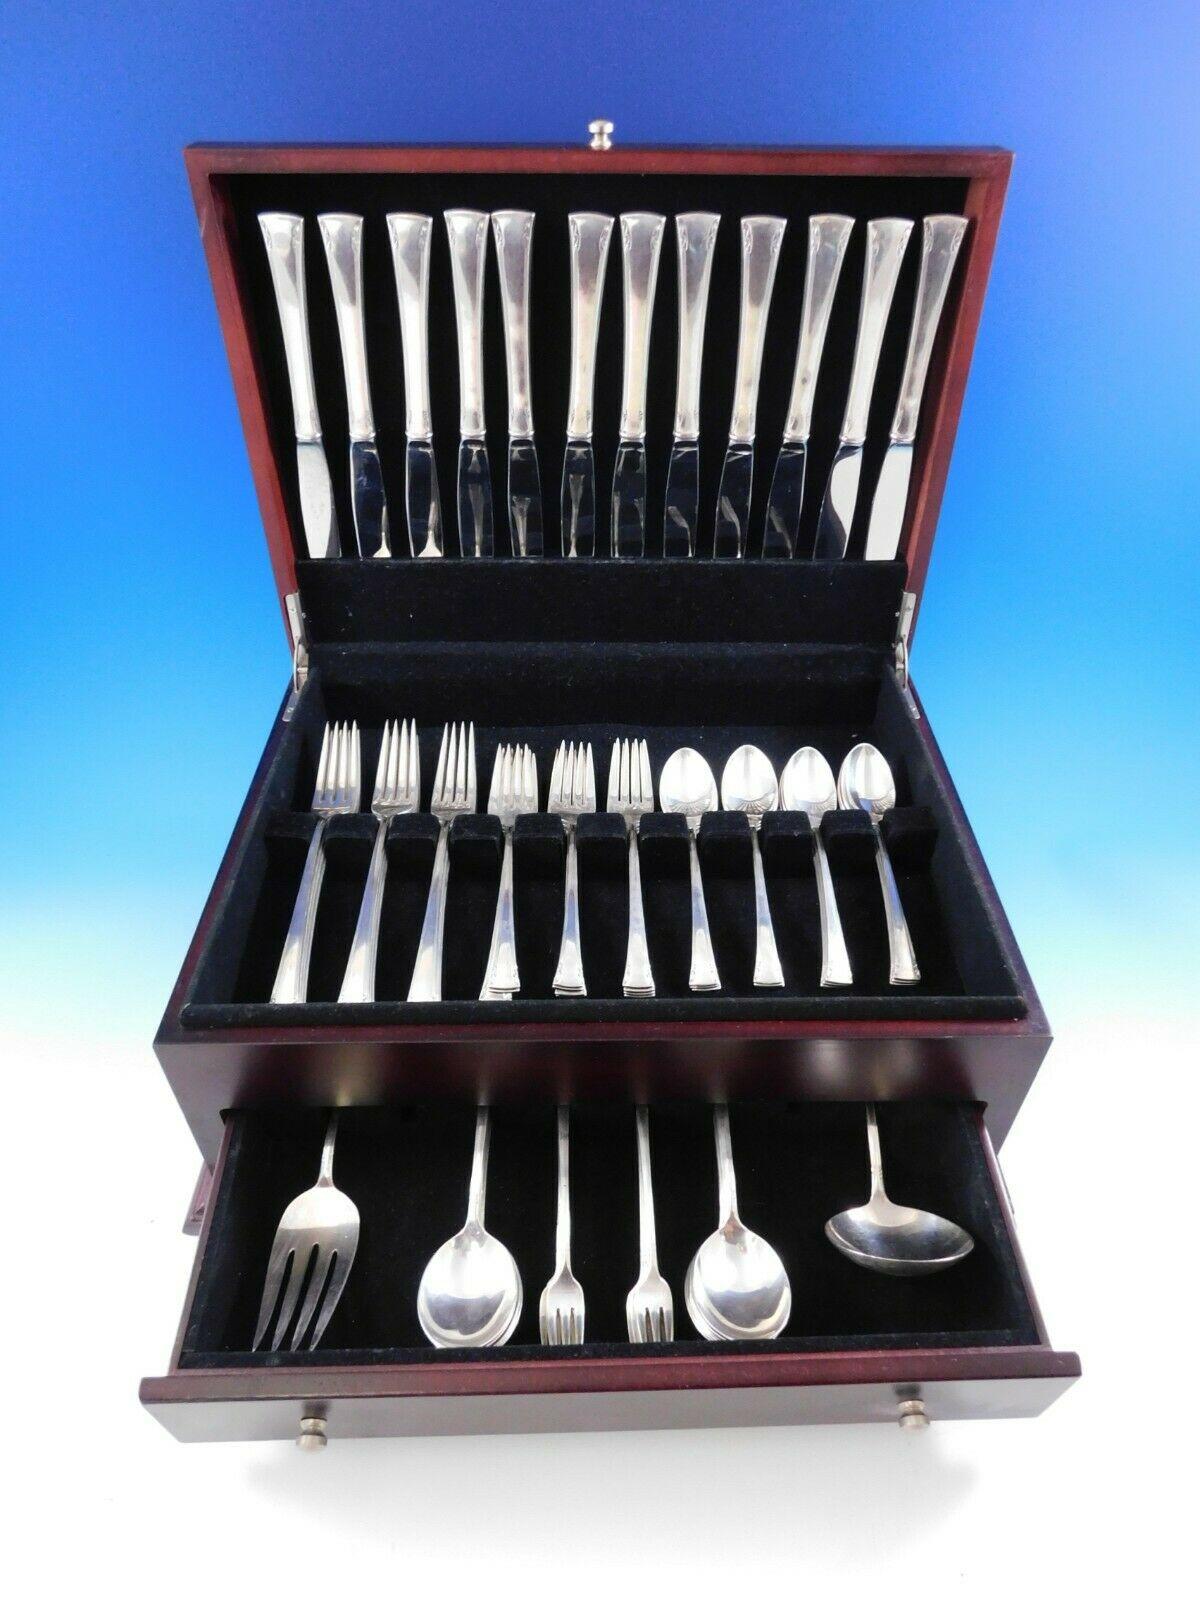 Dinner size serenity by International sterling silver flatware set, 74 pieces. This set includes:

12 dinner size knives, 9 1/2